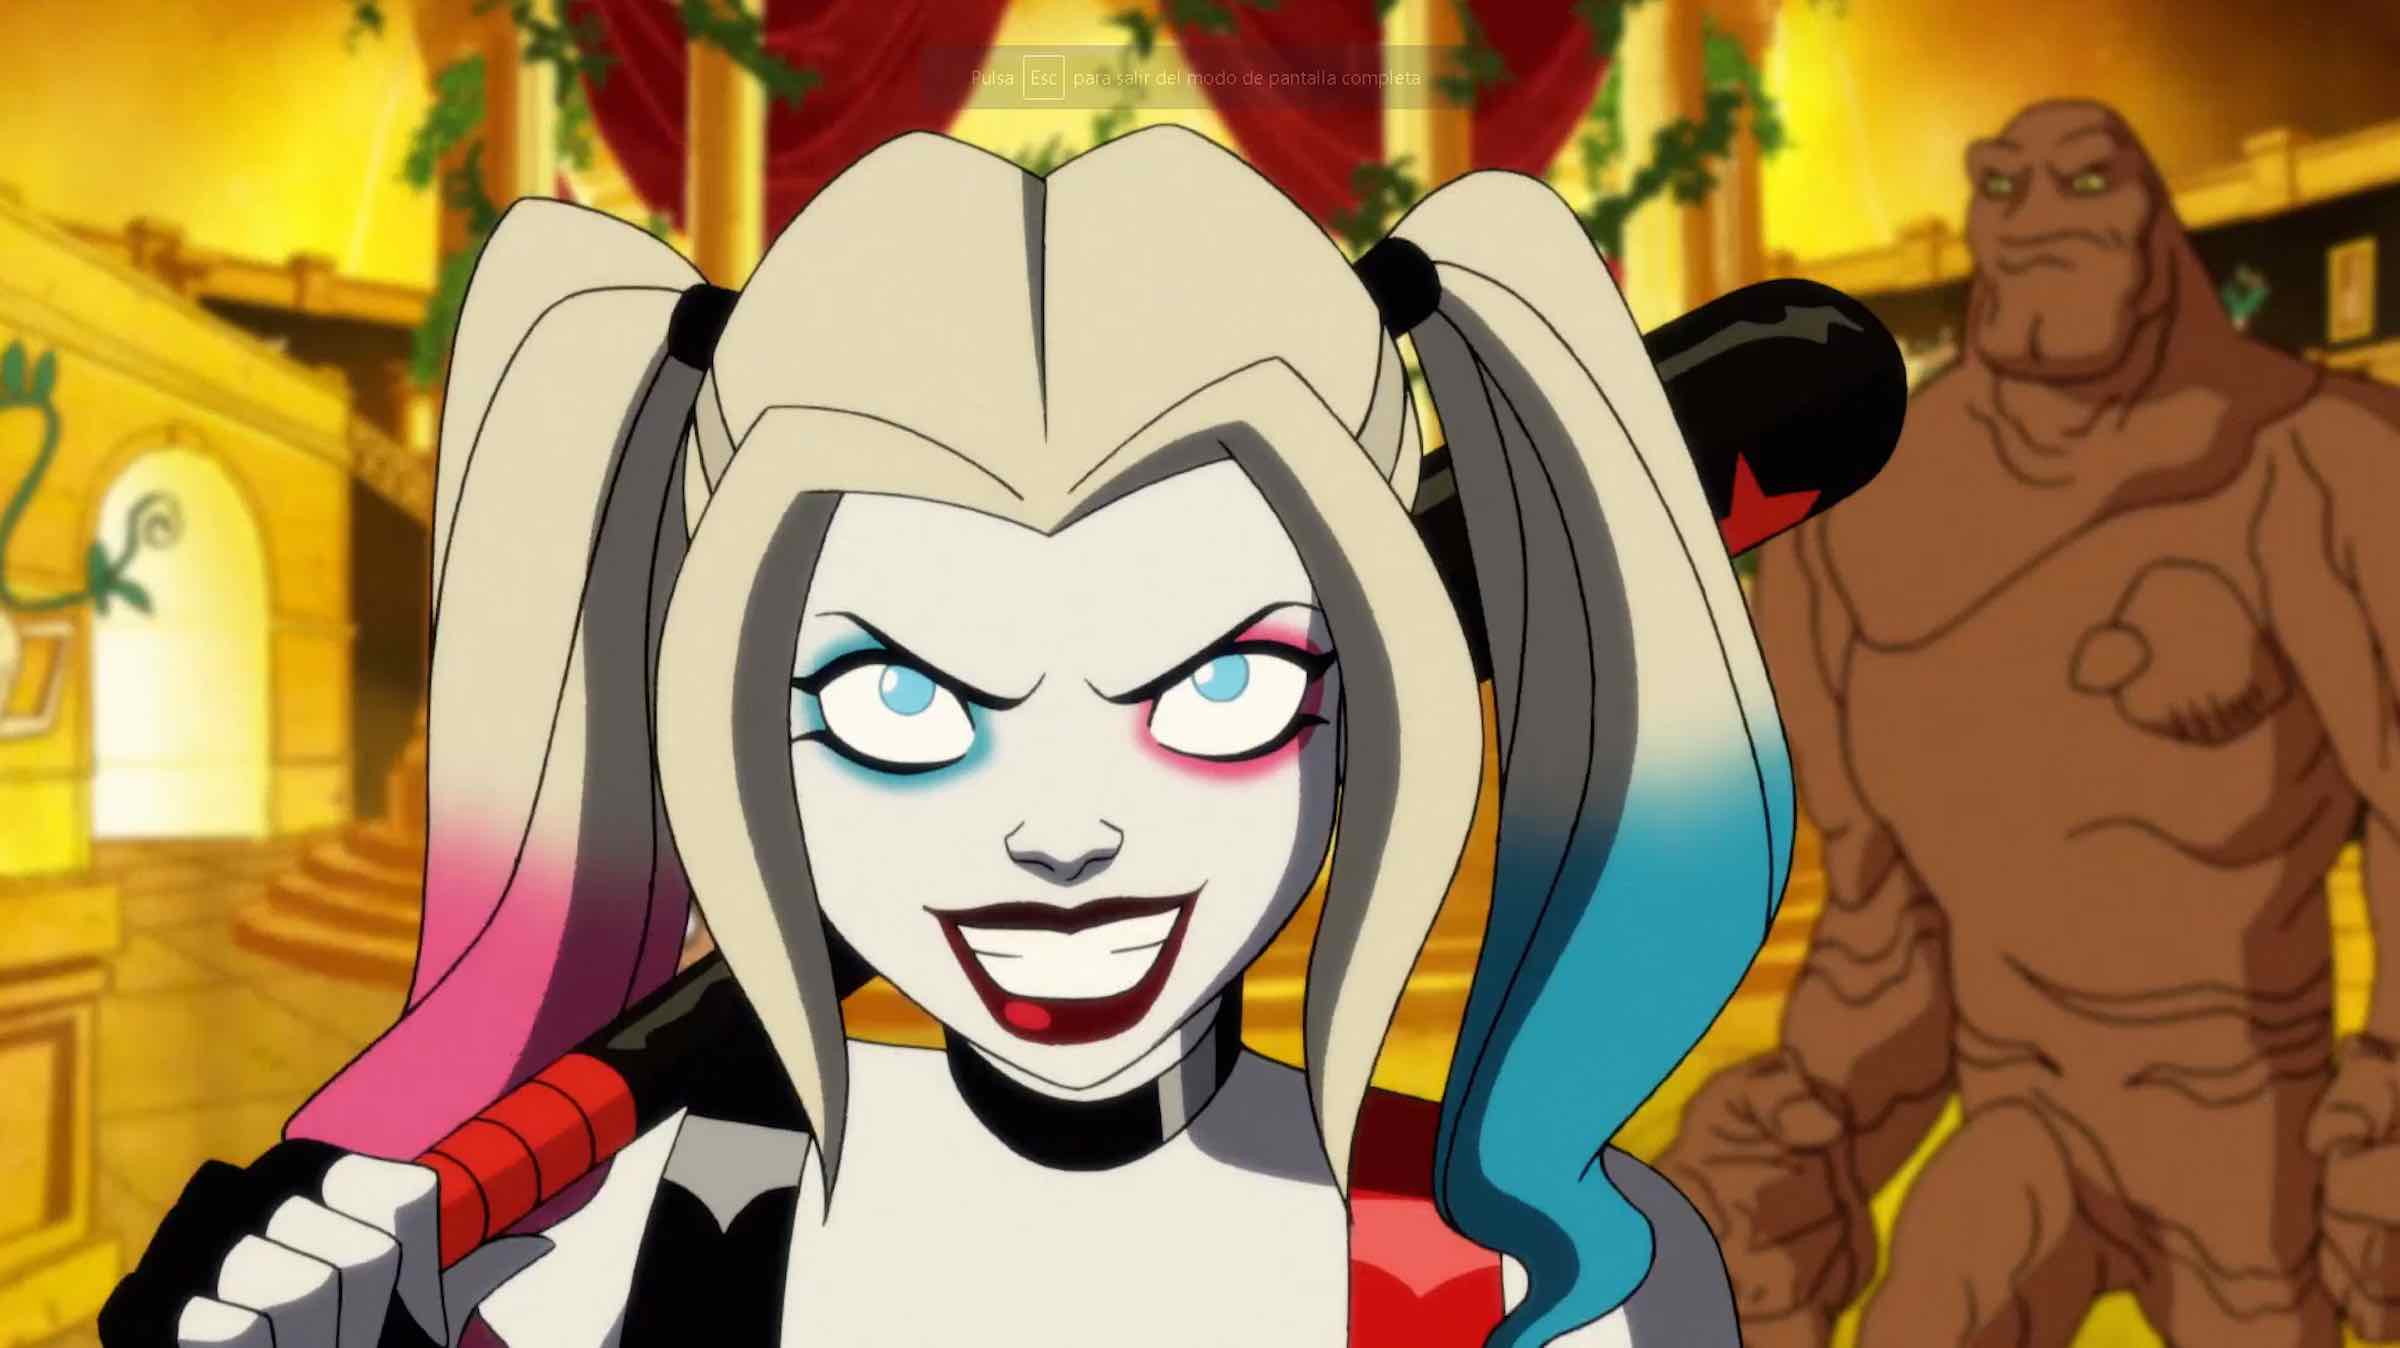 If you’re debating whether or not to justify the expense of yet another streaming service, here’s everything we know about DC's 'Harley Quinn' cartoon.